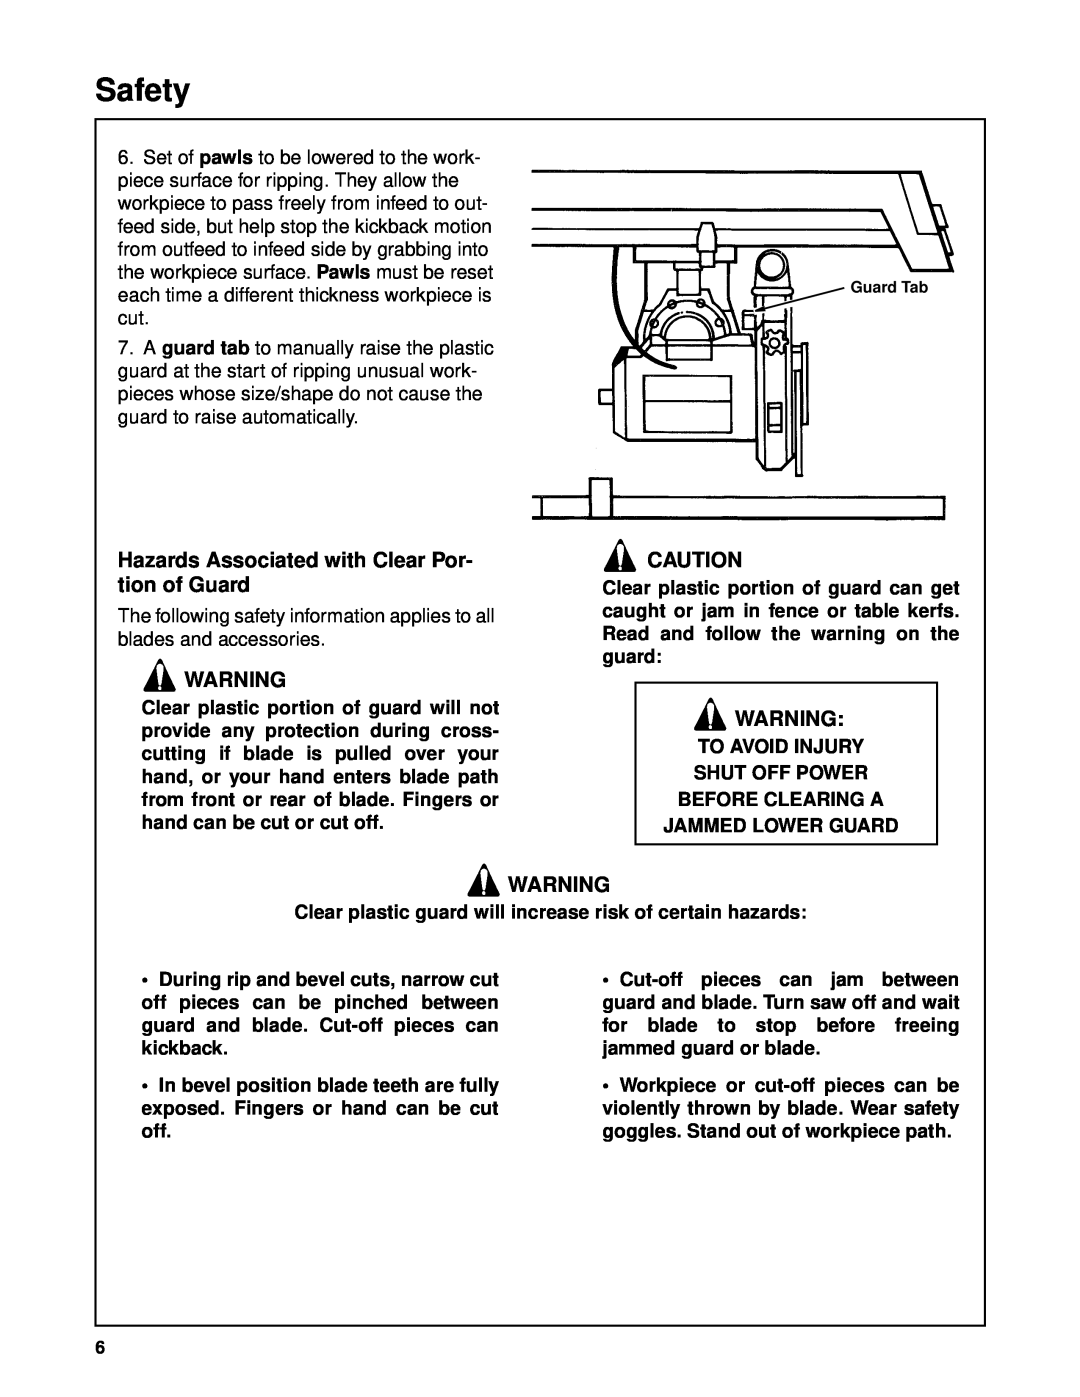 Craftsman 509399, 509398 owner manual Hazards Associated with Clear Por- tion of Guard, Safety 